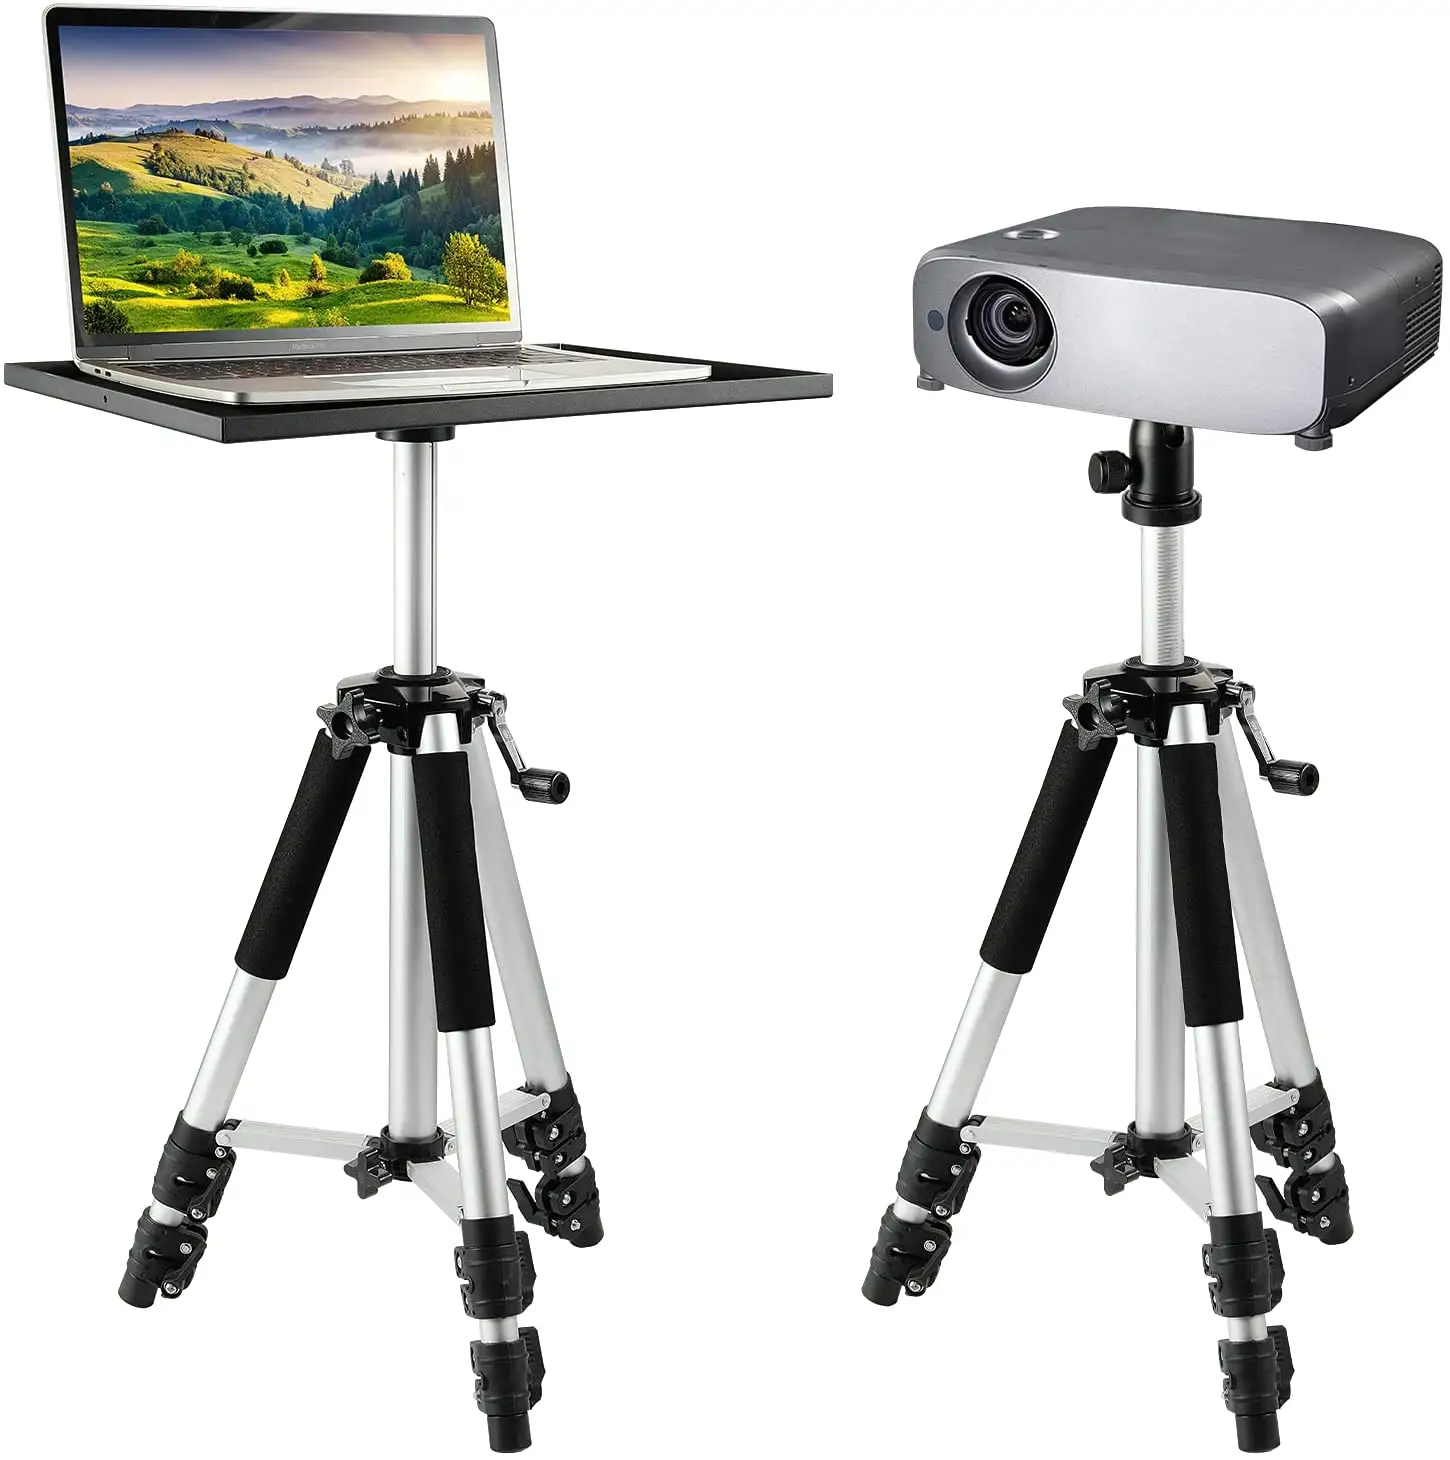 Facilife Projector Stand Tripod,Laptop Tripod Stand Adjustable Height 22 to 50 Inches, Multi-Purpose Projector Tripod Stand,